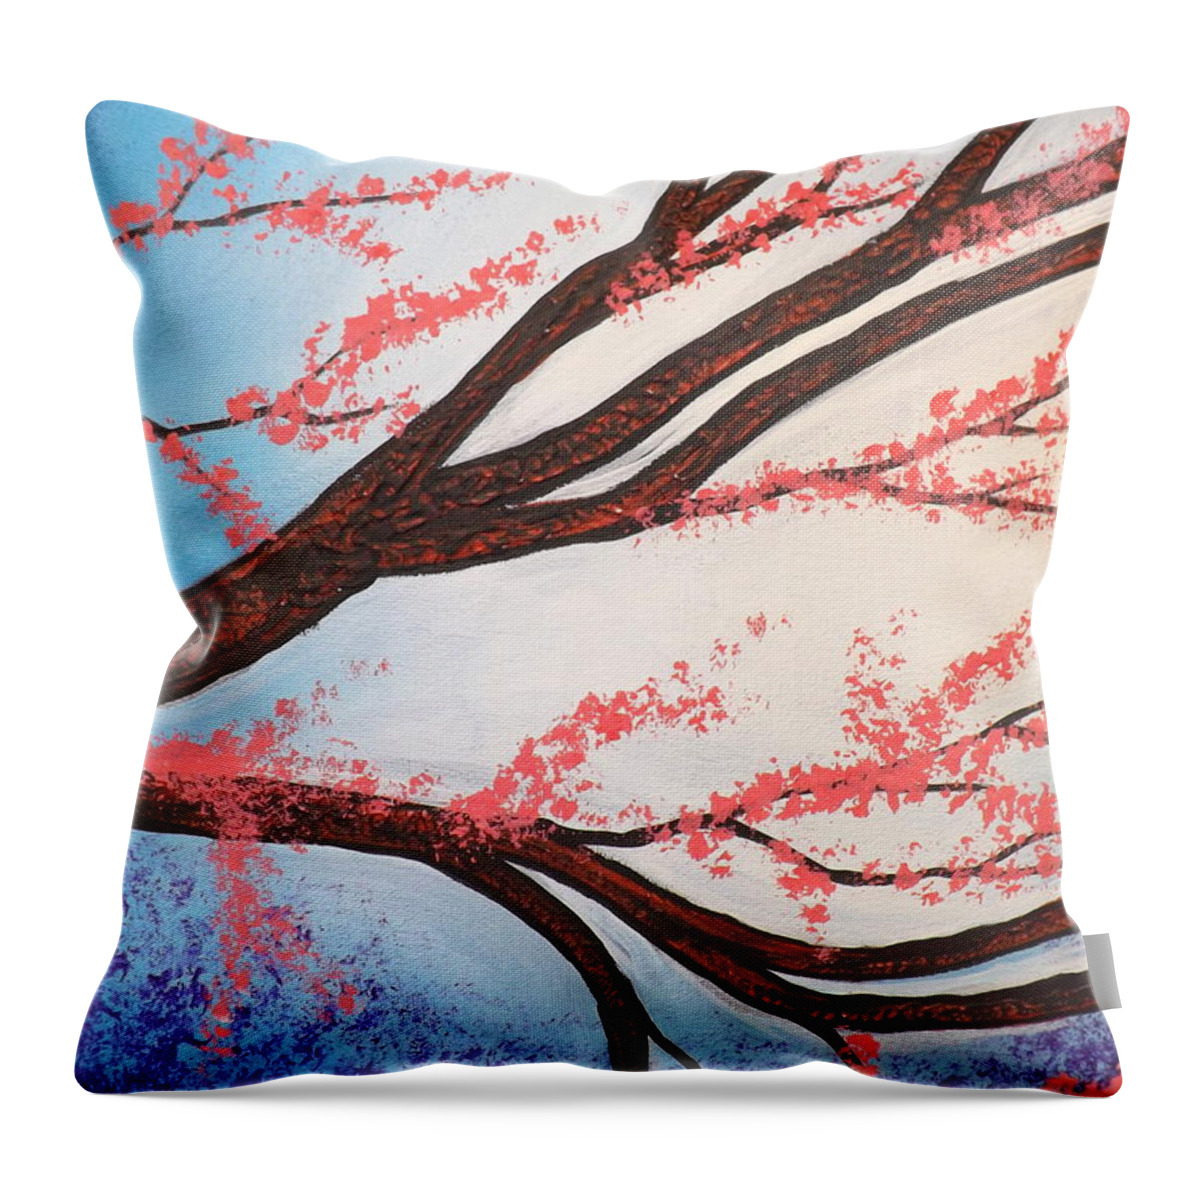 Asian Bloom Triptych Throw Pillow featuring the painting Asian Bloom Triptych 2 by Darren Robinson